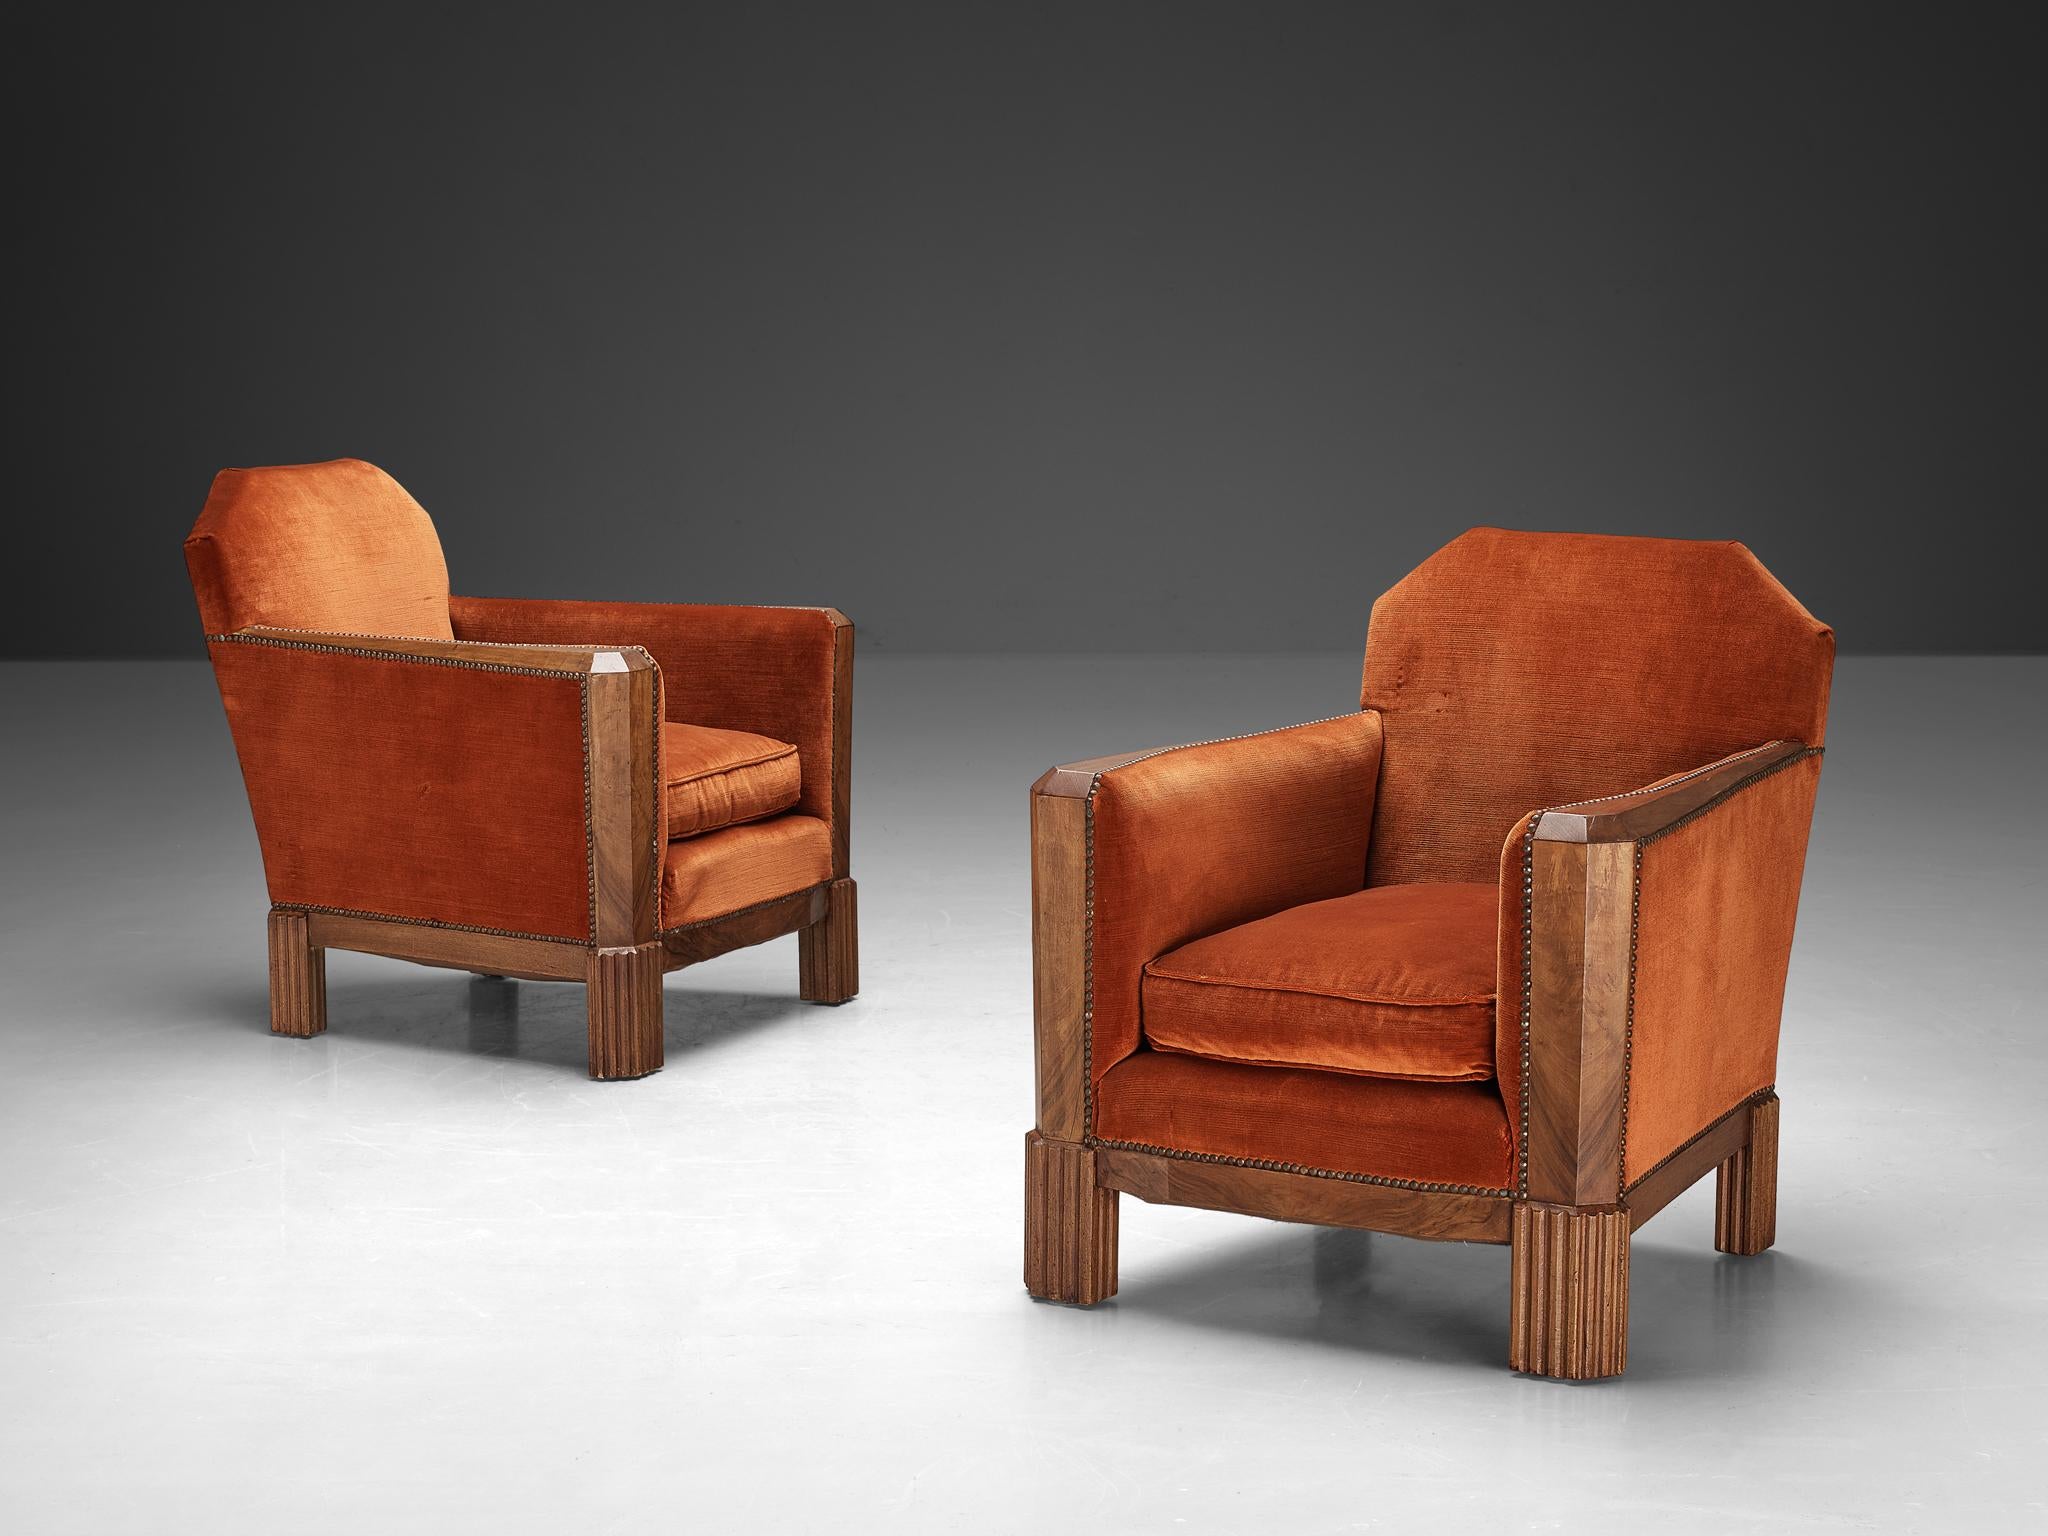 French Art Deco Pair of Lounge Chairs in Orange Corduroy and Walnut